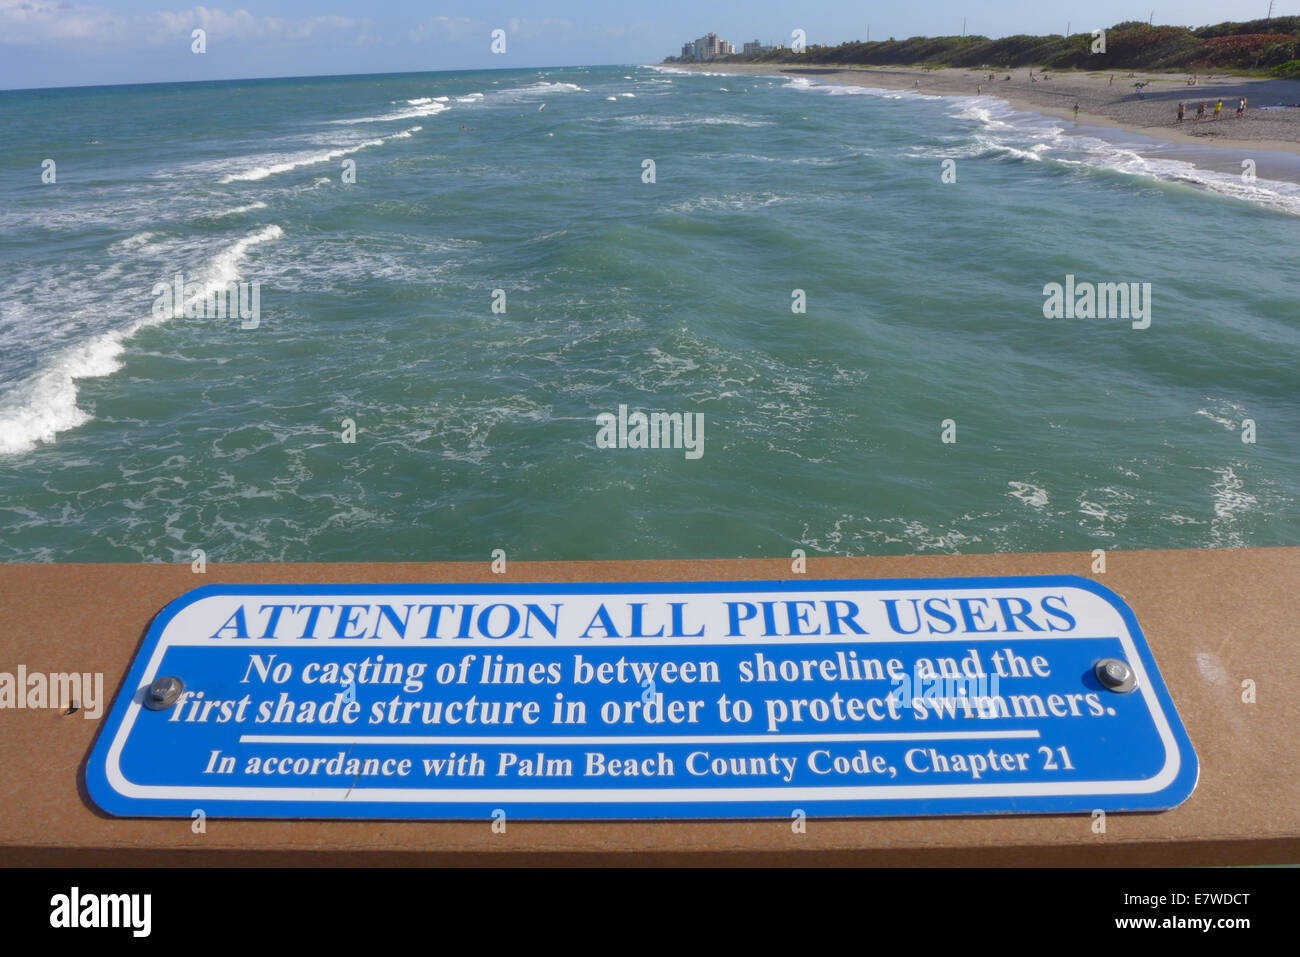 Warning Sign to fishermen on the Pier at Juno Beach Florida Stock Photo